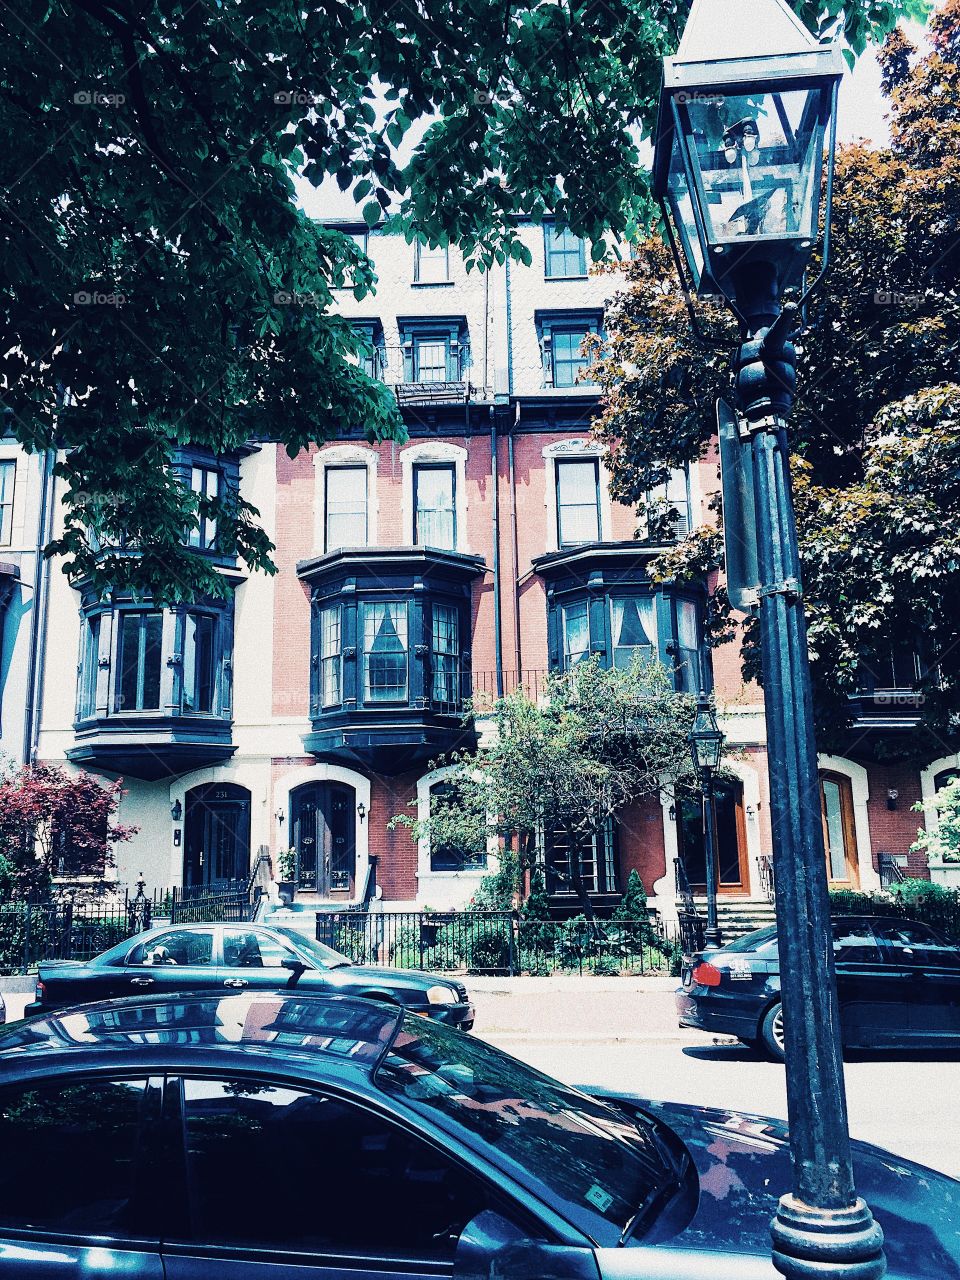 Bricks in Beantown. A stroll down a historic Boston district yields views of homes for those that like the finer things in life